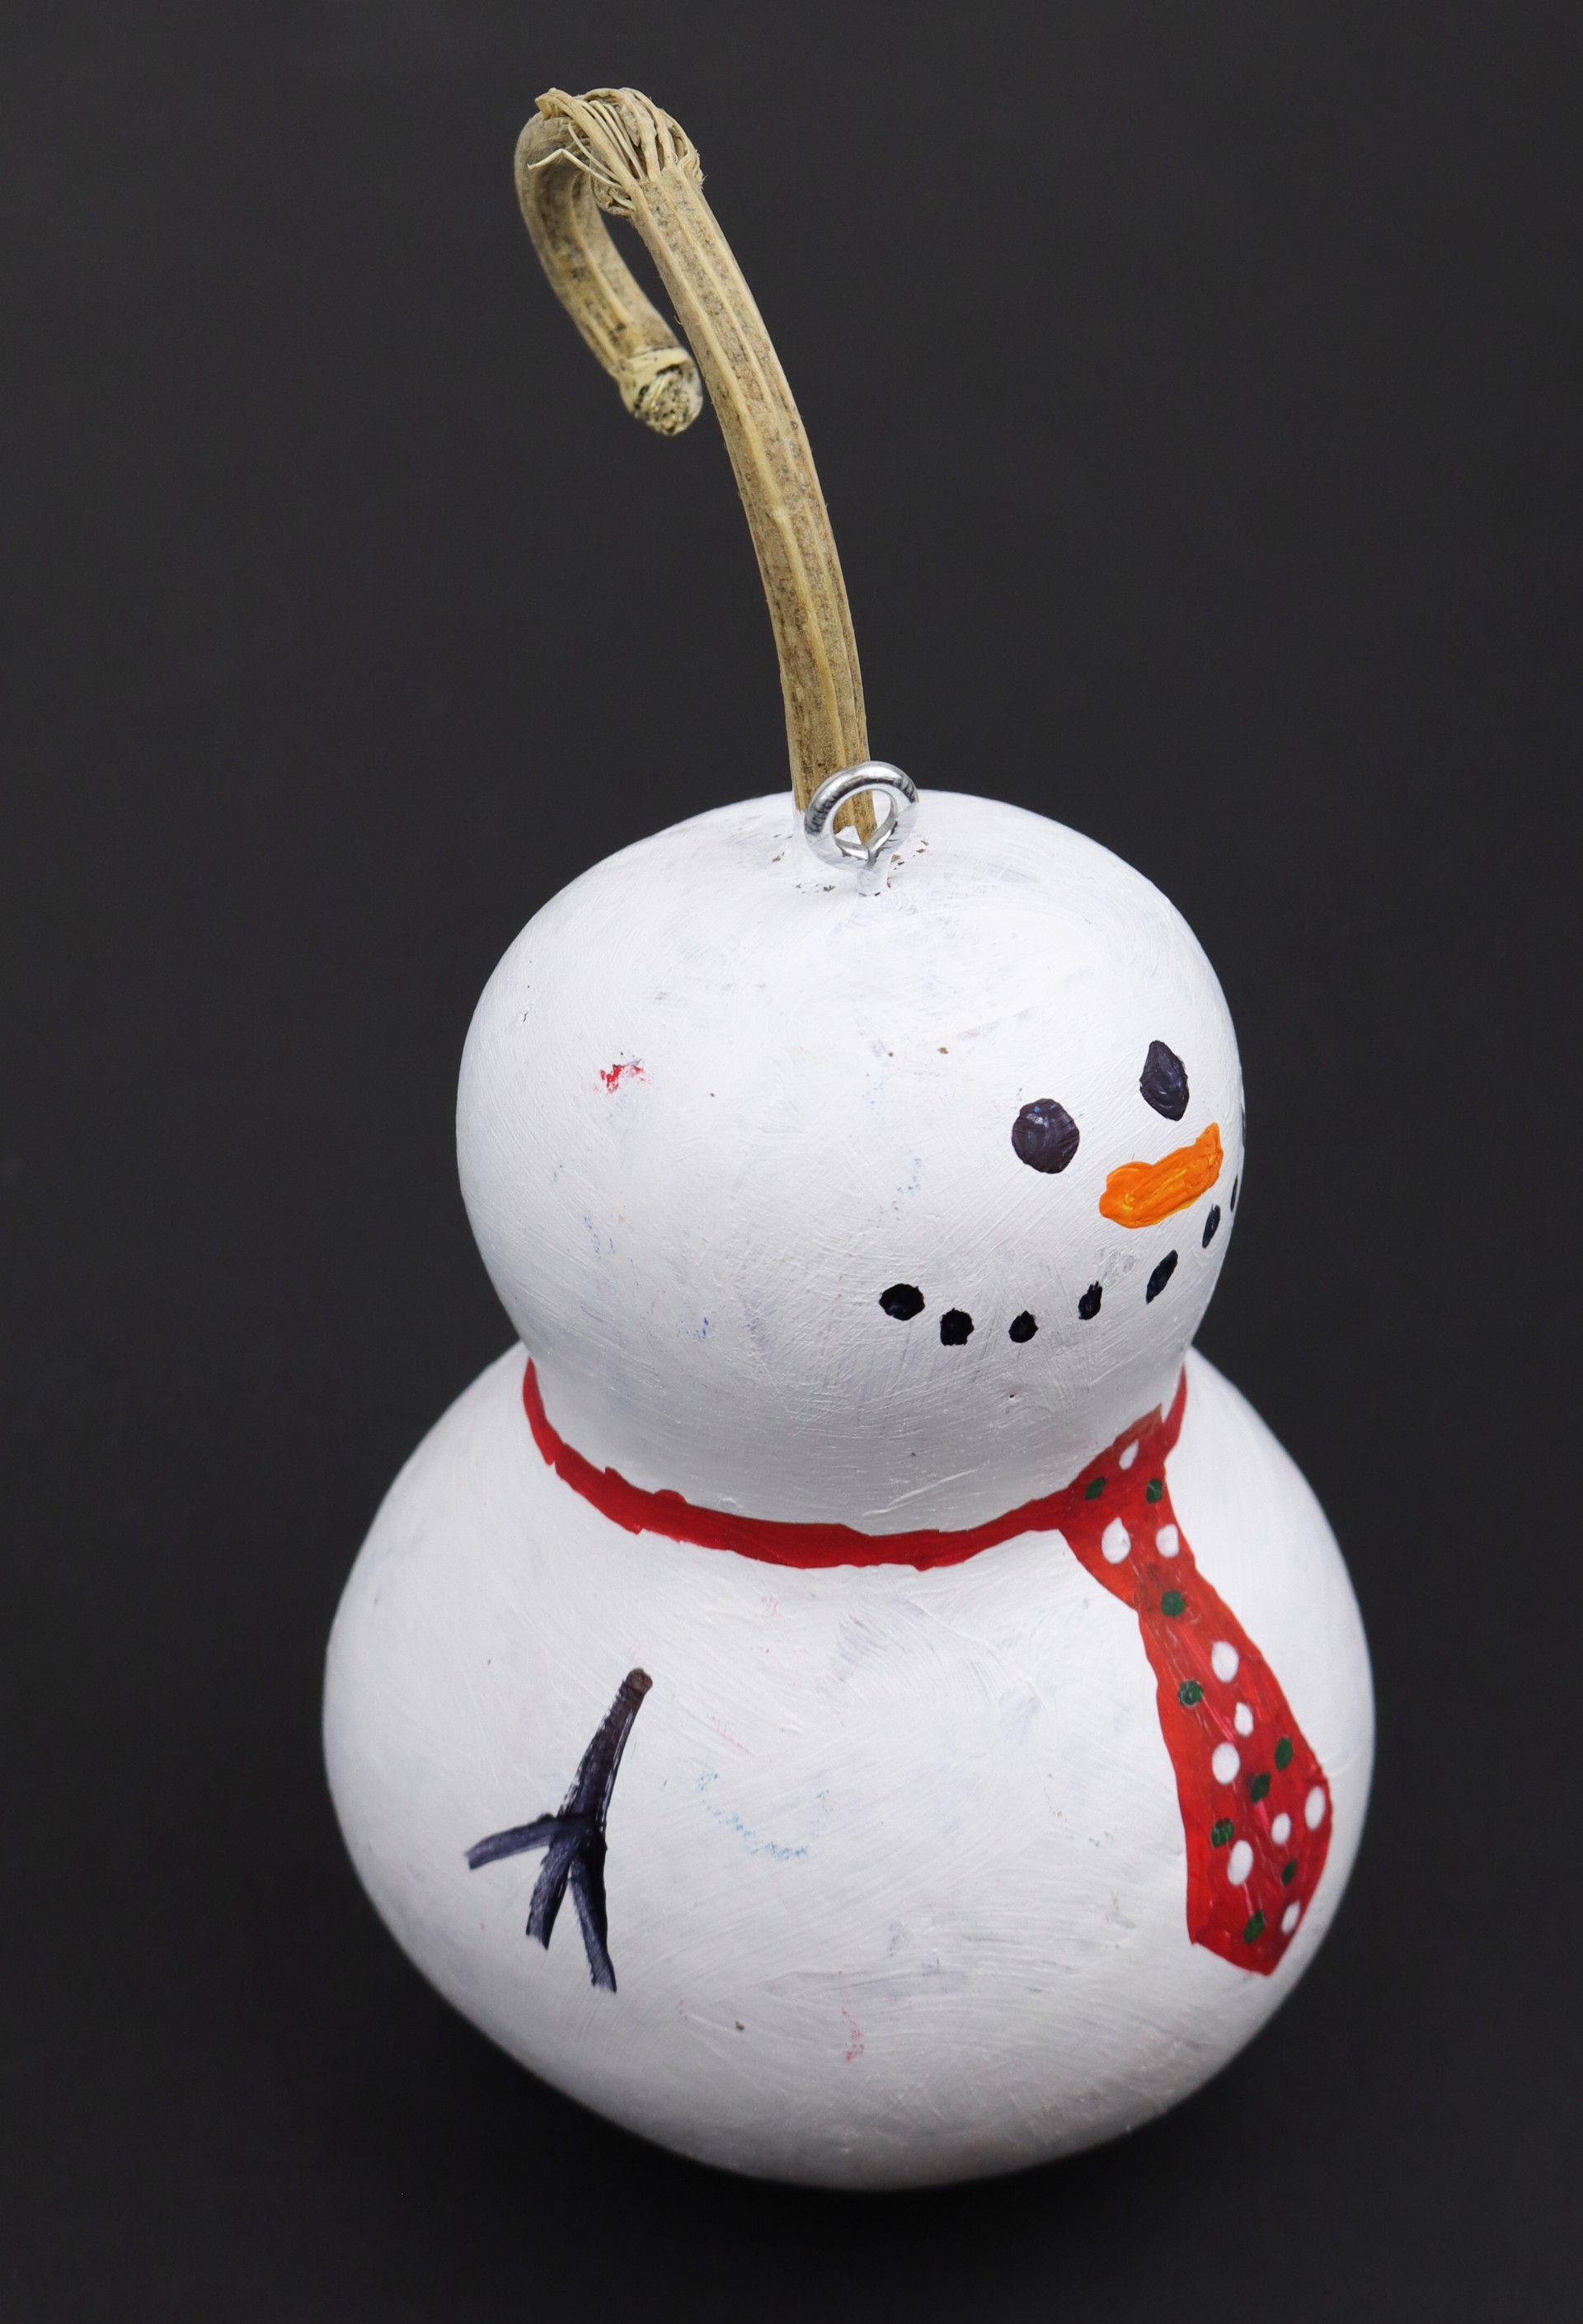 Professional Snowman (gourd ornament) by Eric Kendrick